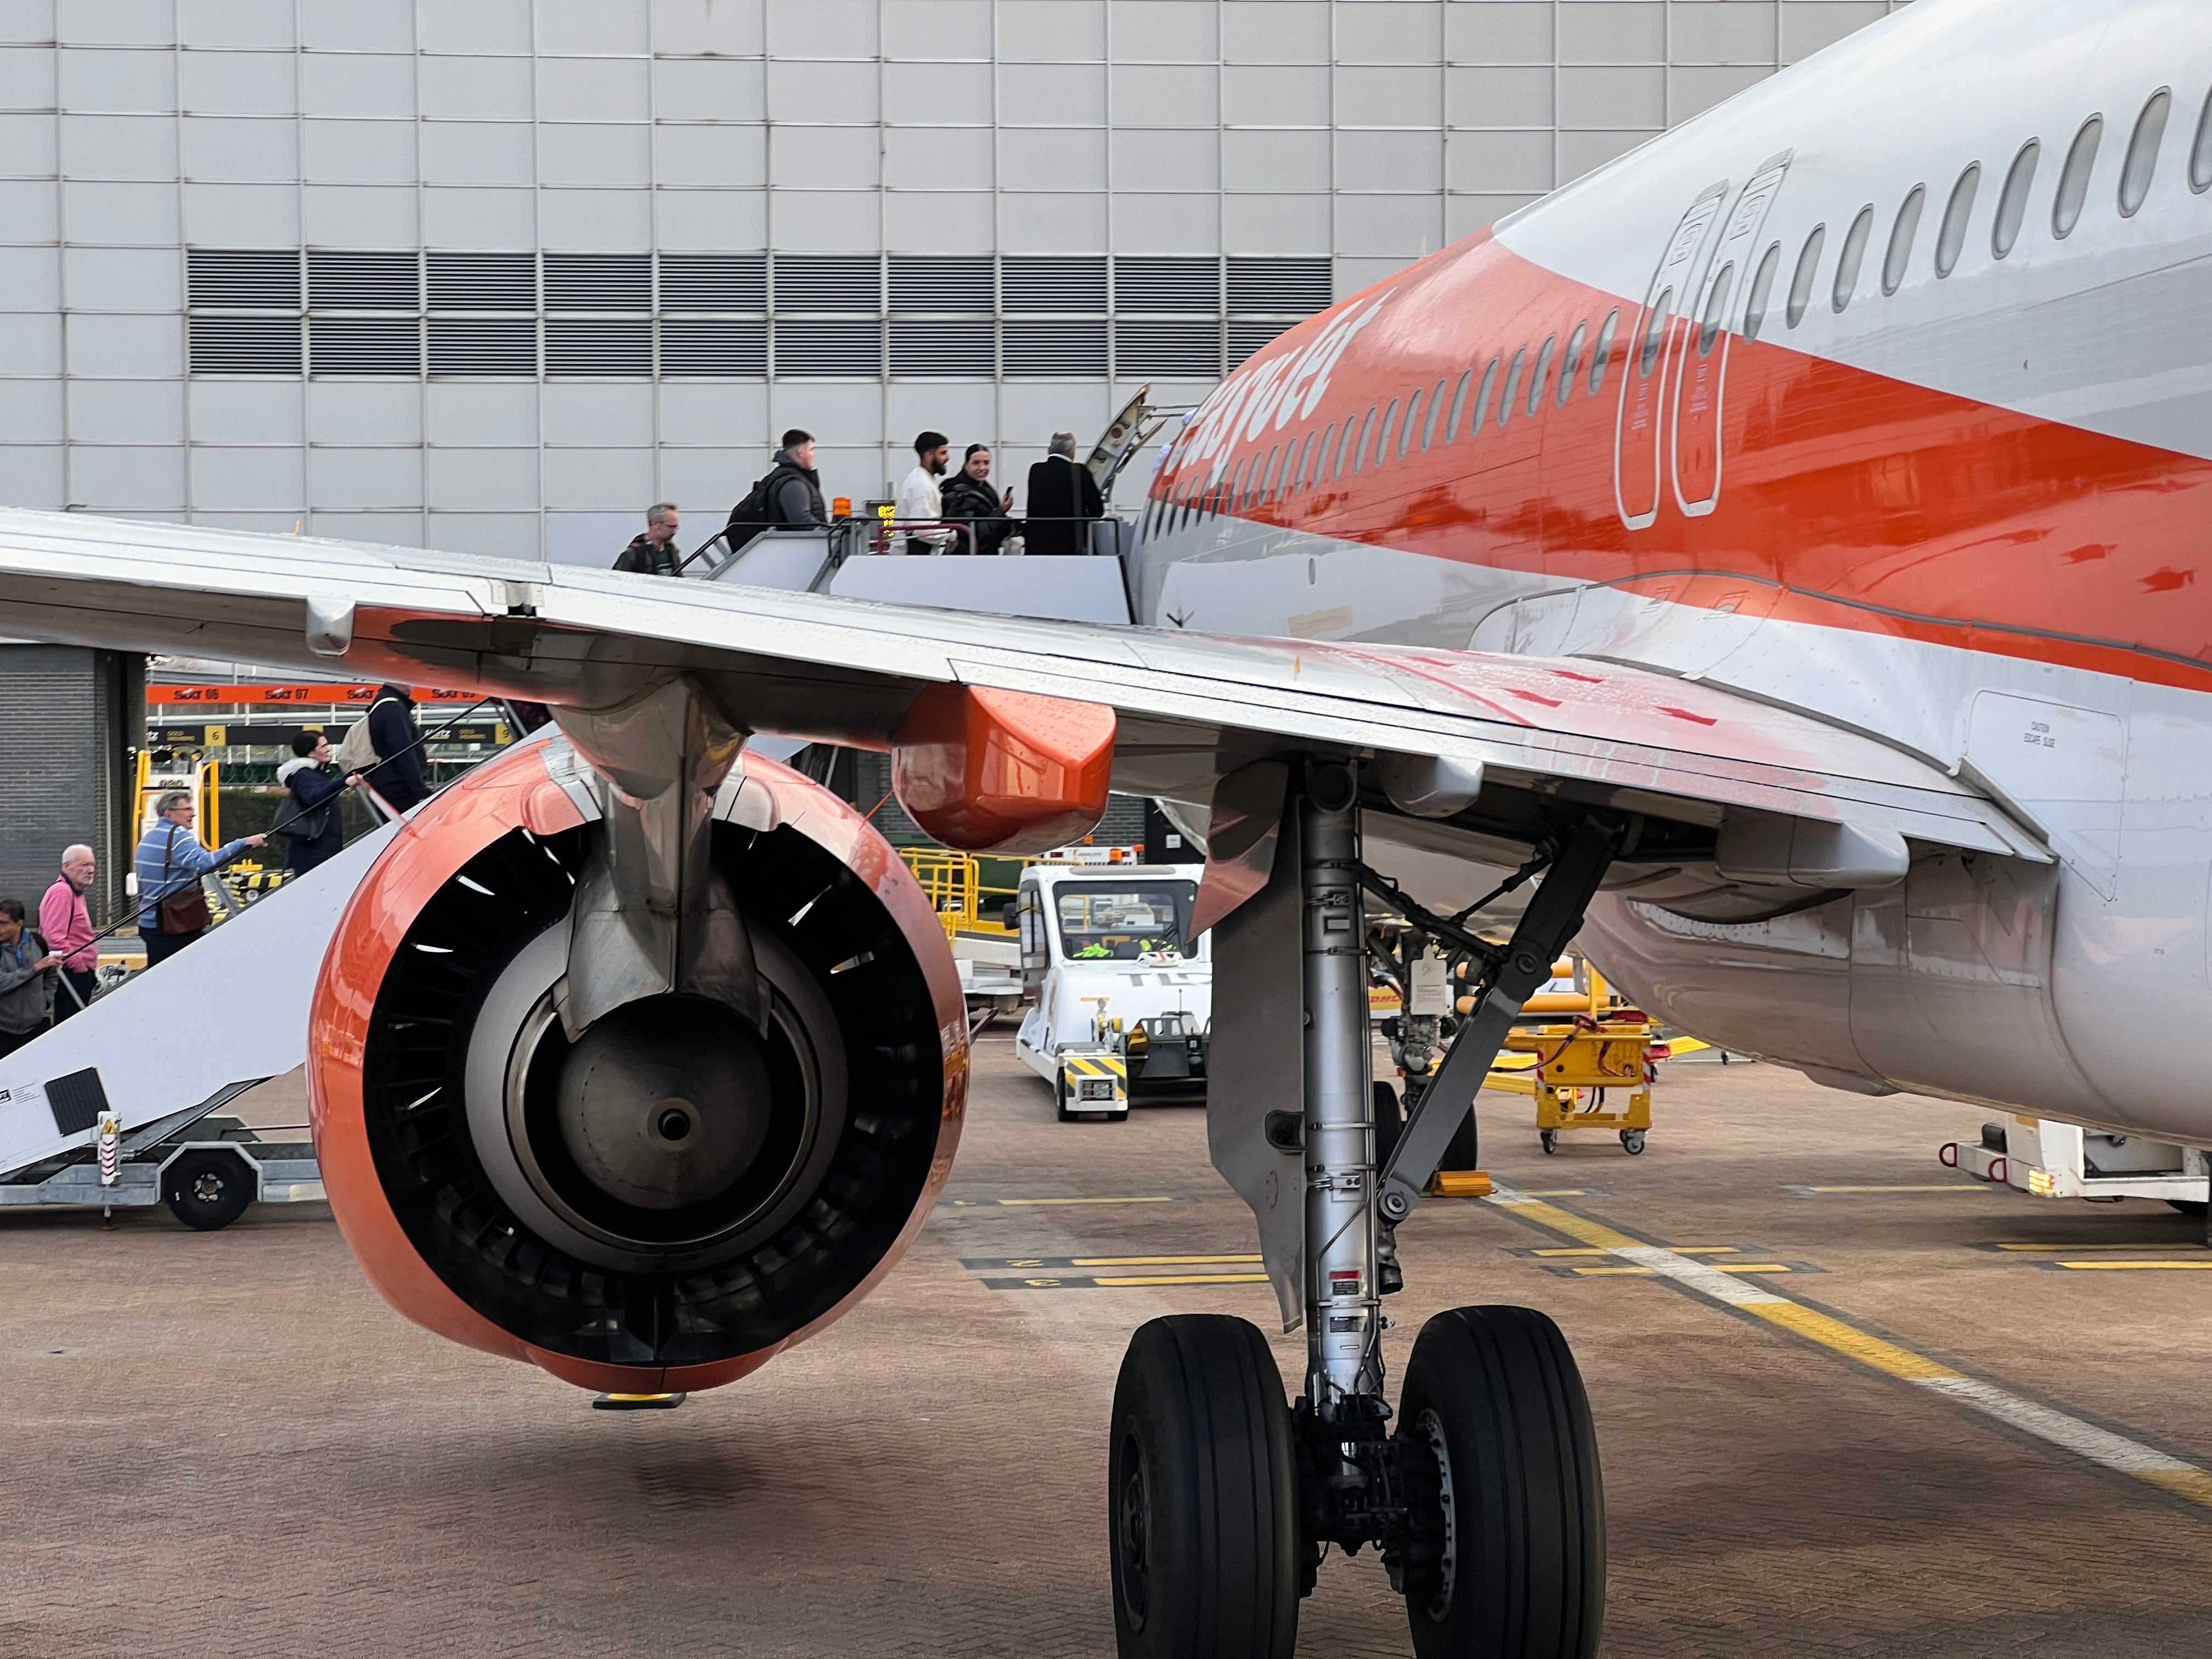 Going places? Passengers boarding an easyJet aircraft at London Gatwick airport, the airline’s main base